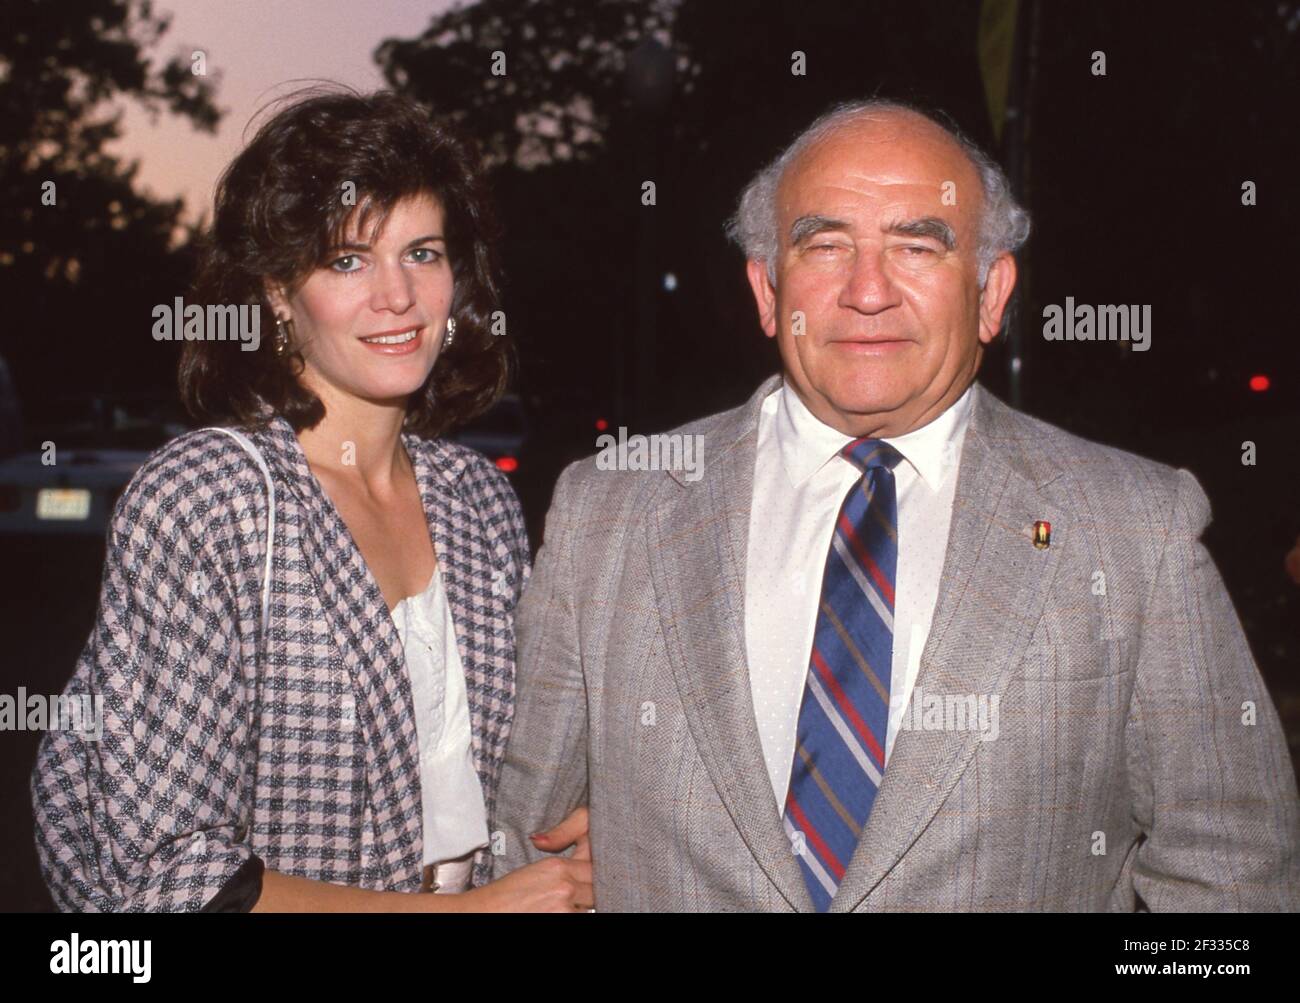 LOS ANGELES, CA - AUGUST 26: Actor Ed Asner and Gwen Seliger attend fundraiser for Michael Dukakis on August 26, 1987 at Sally Field's home in Los Angeles, California. Credit: Ralph Dominguez/MediaPunch Stock Photo